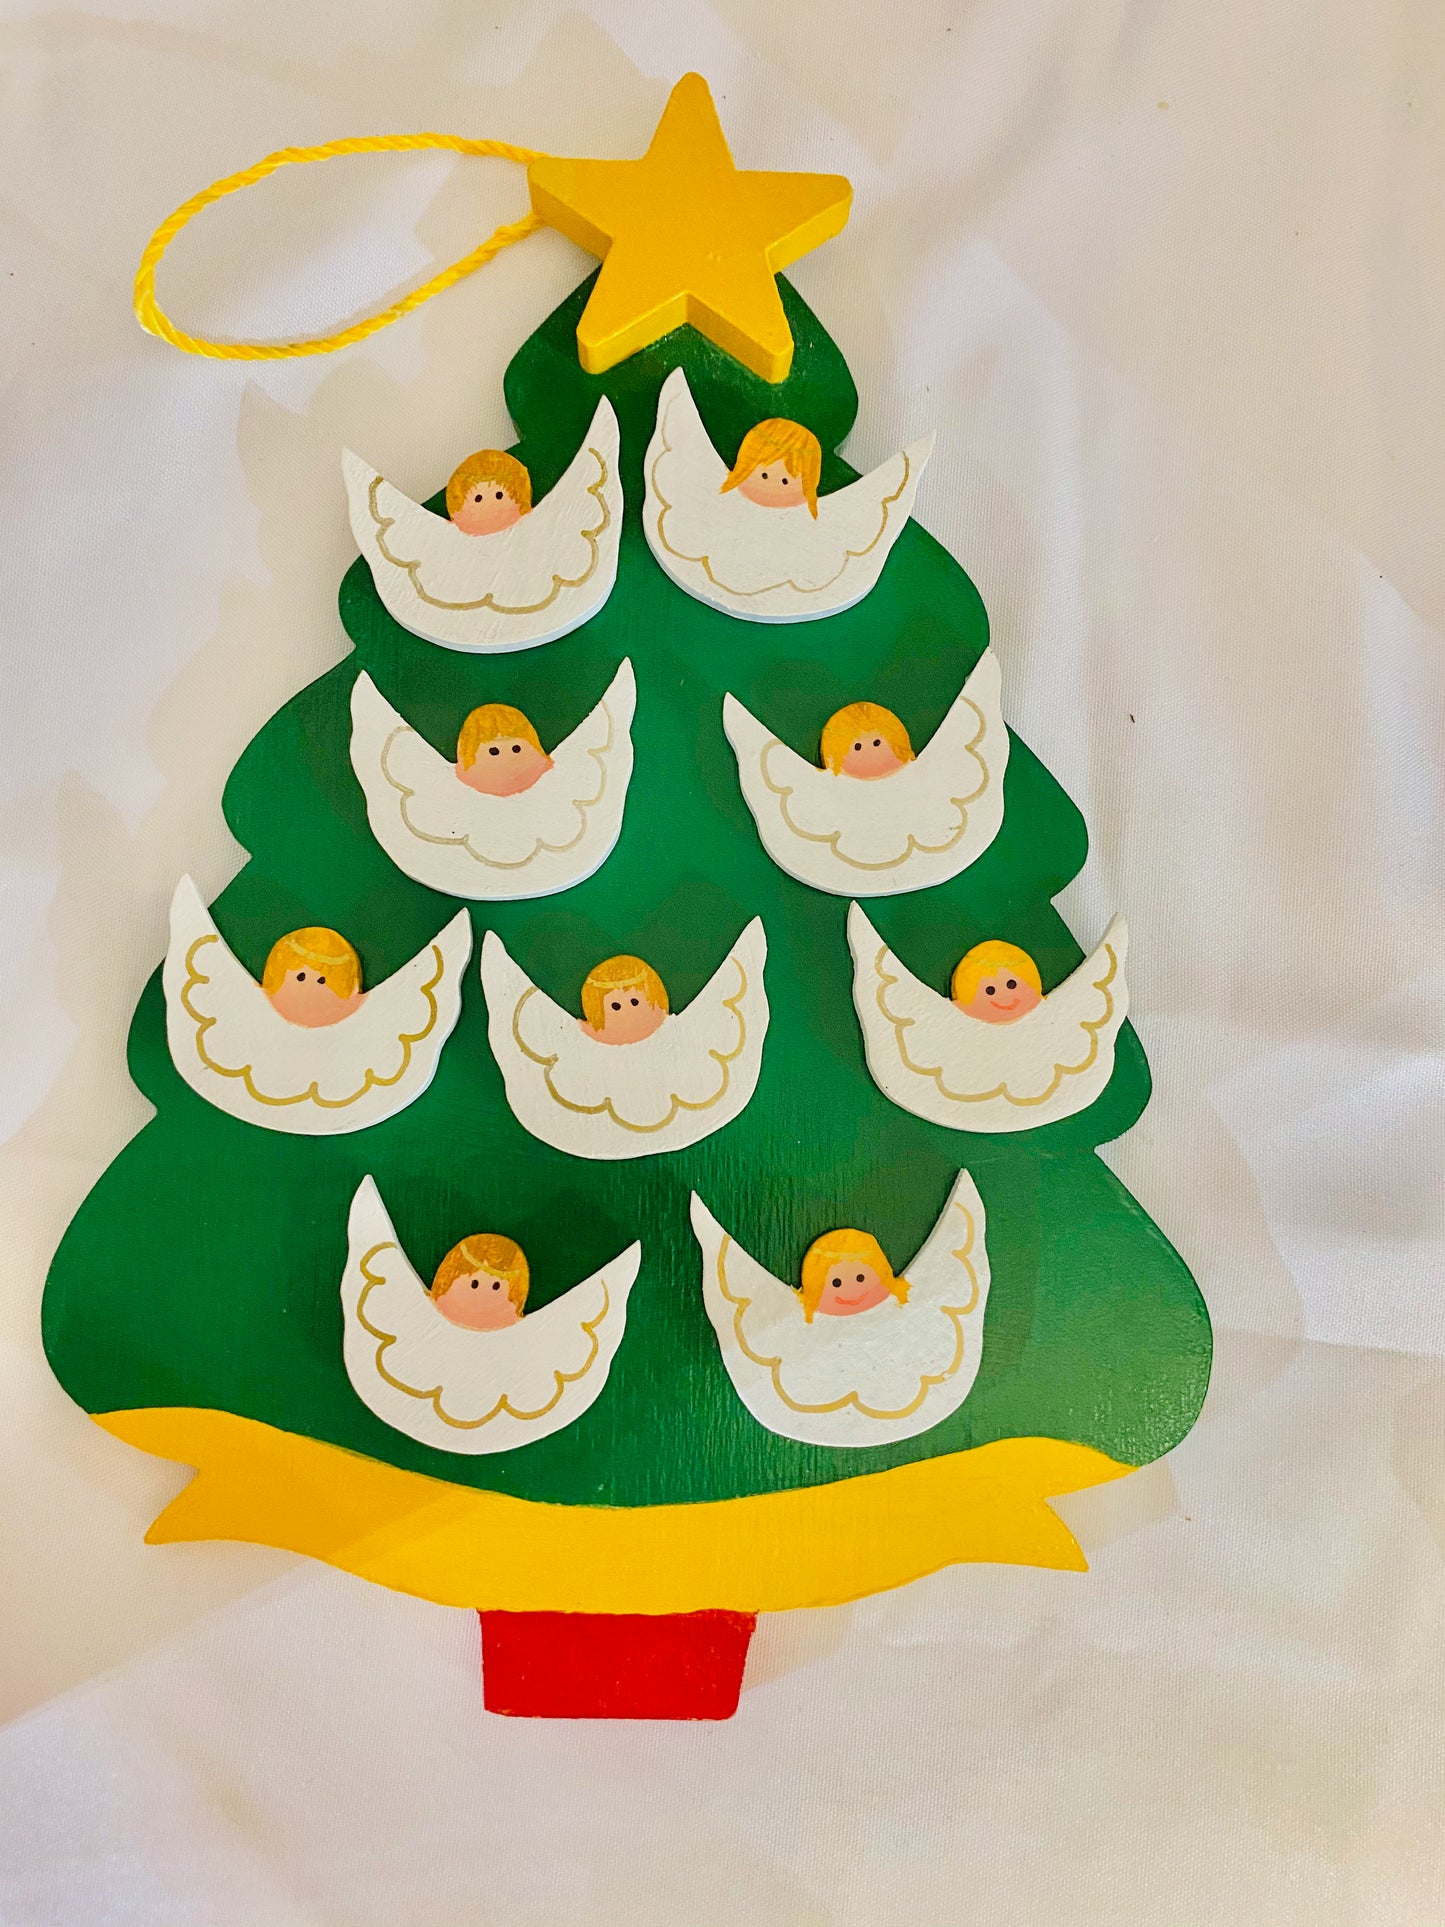 Personalized Ornament 9 Angels on a Christmas Tree  7.5" X 6"